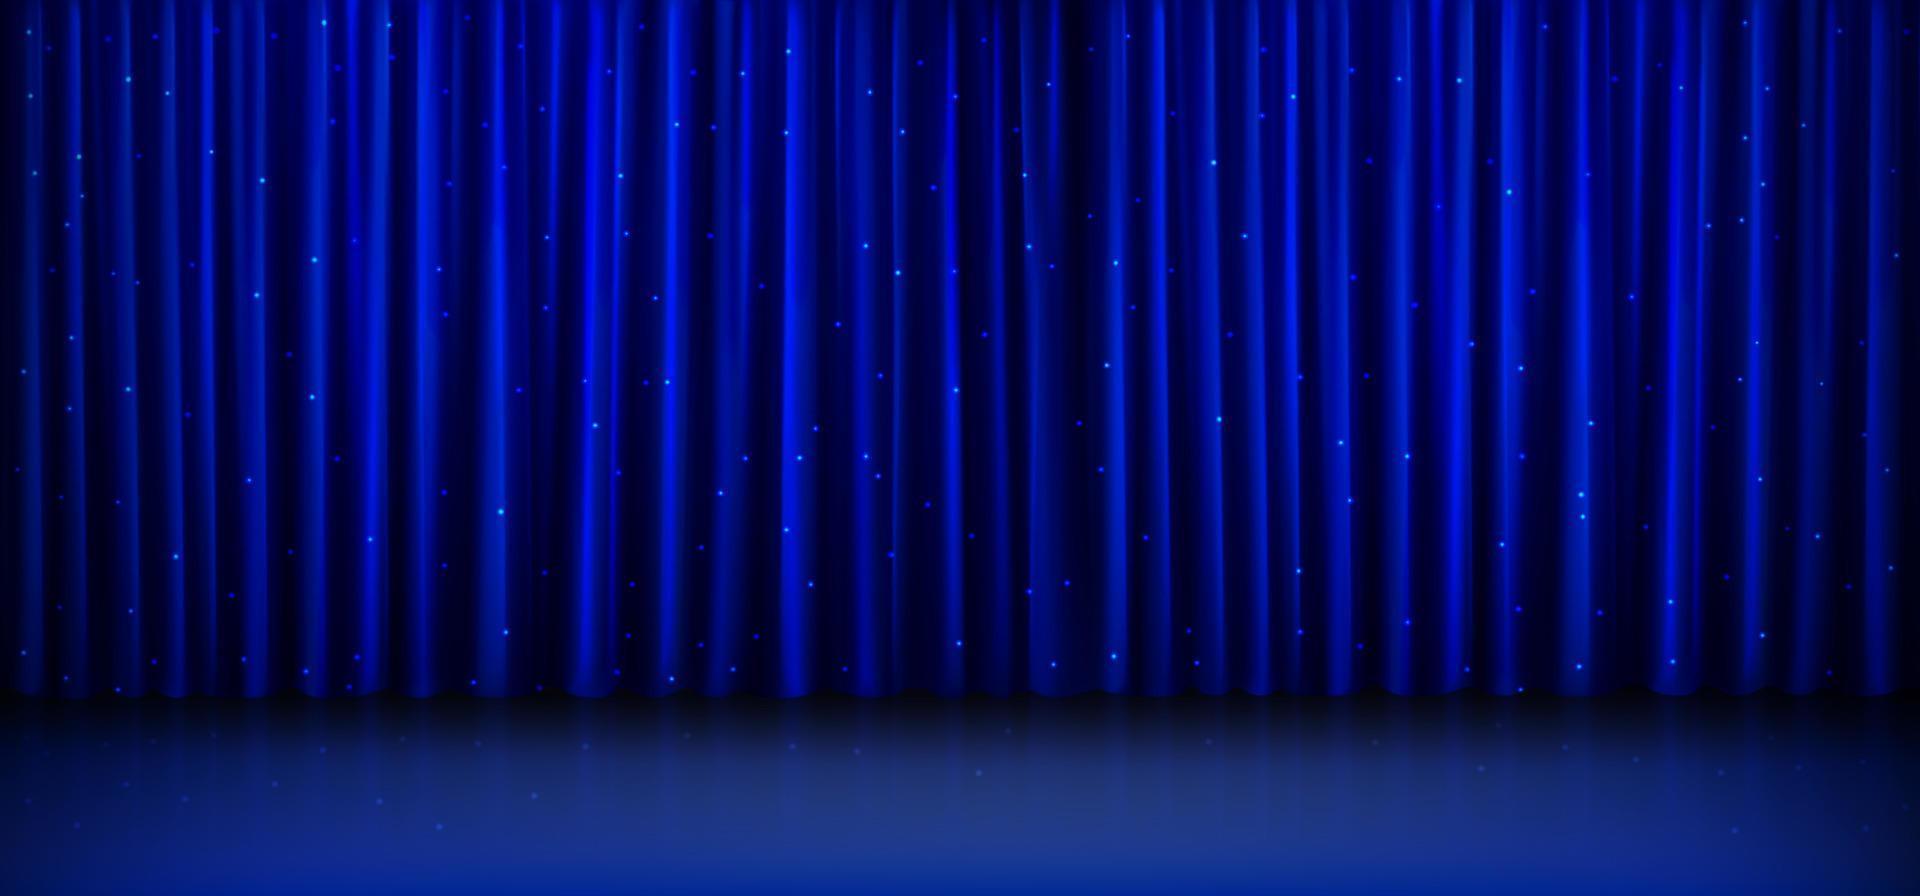 Blue curtain for theater or cinema stage vector